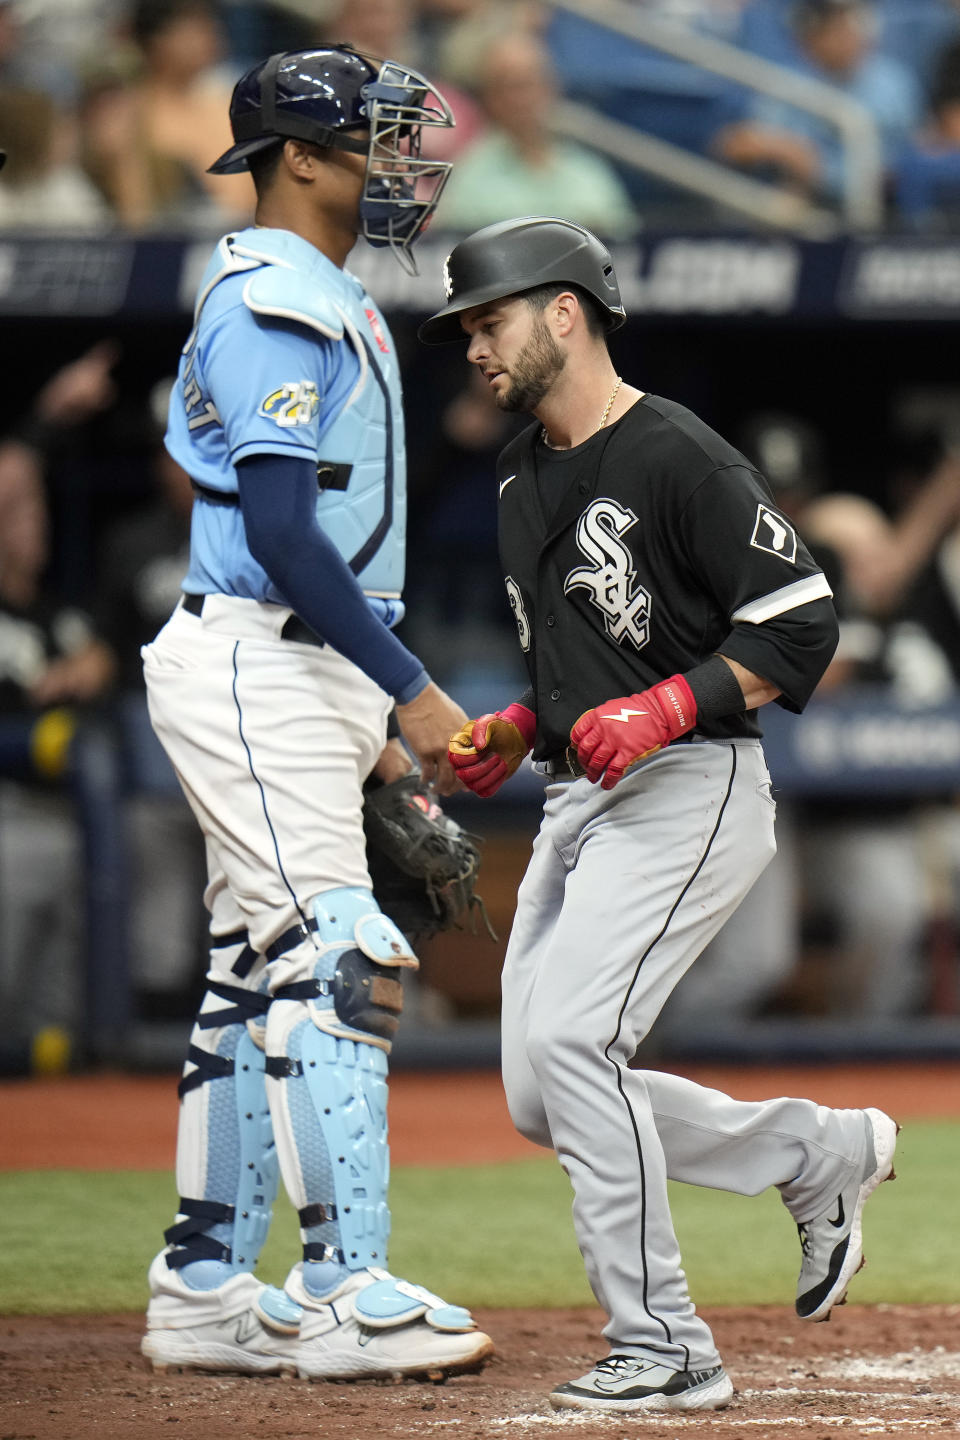 Chicago White Sox's Andrew Benintendi, right, scores in front of Tampa Bay Rays catcher Christian Bethancourt on an RBI double by Eloy Jimenez during the fourth inning of a baseball game Sunday, April 23, 2023, in St. Petersburg, Fla. (AP Photo/Chris O'Meara)